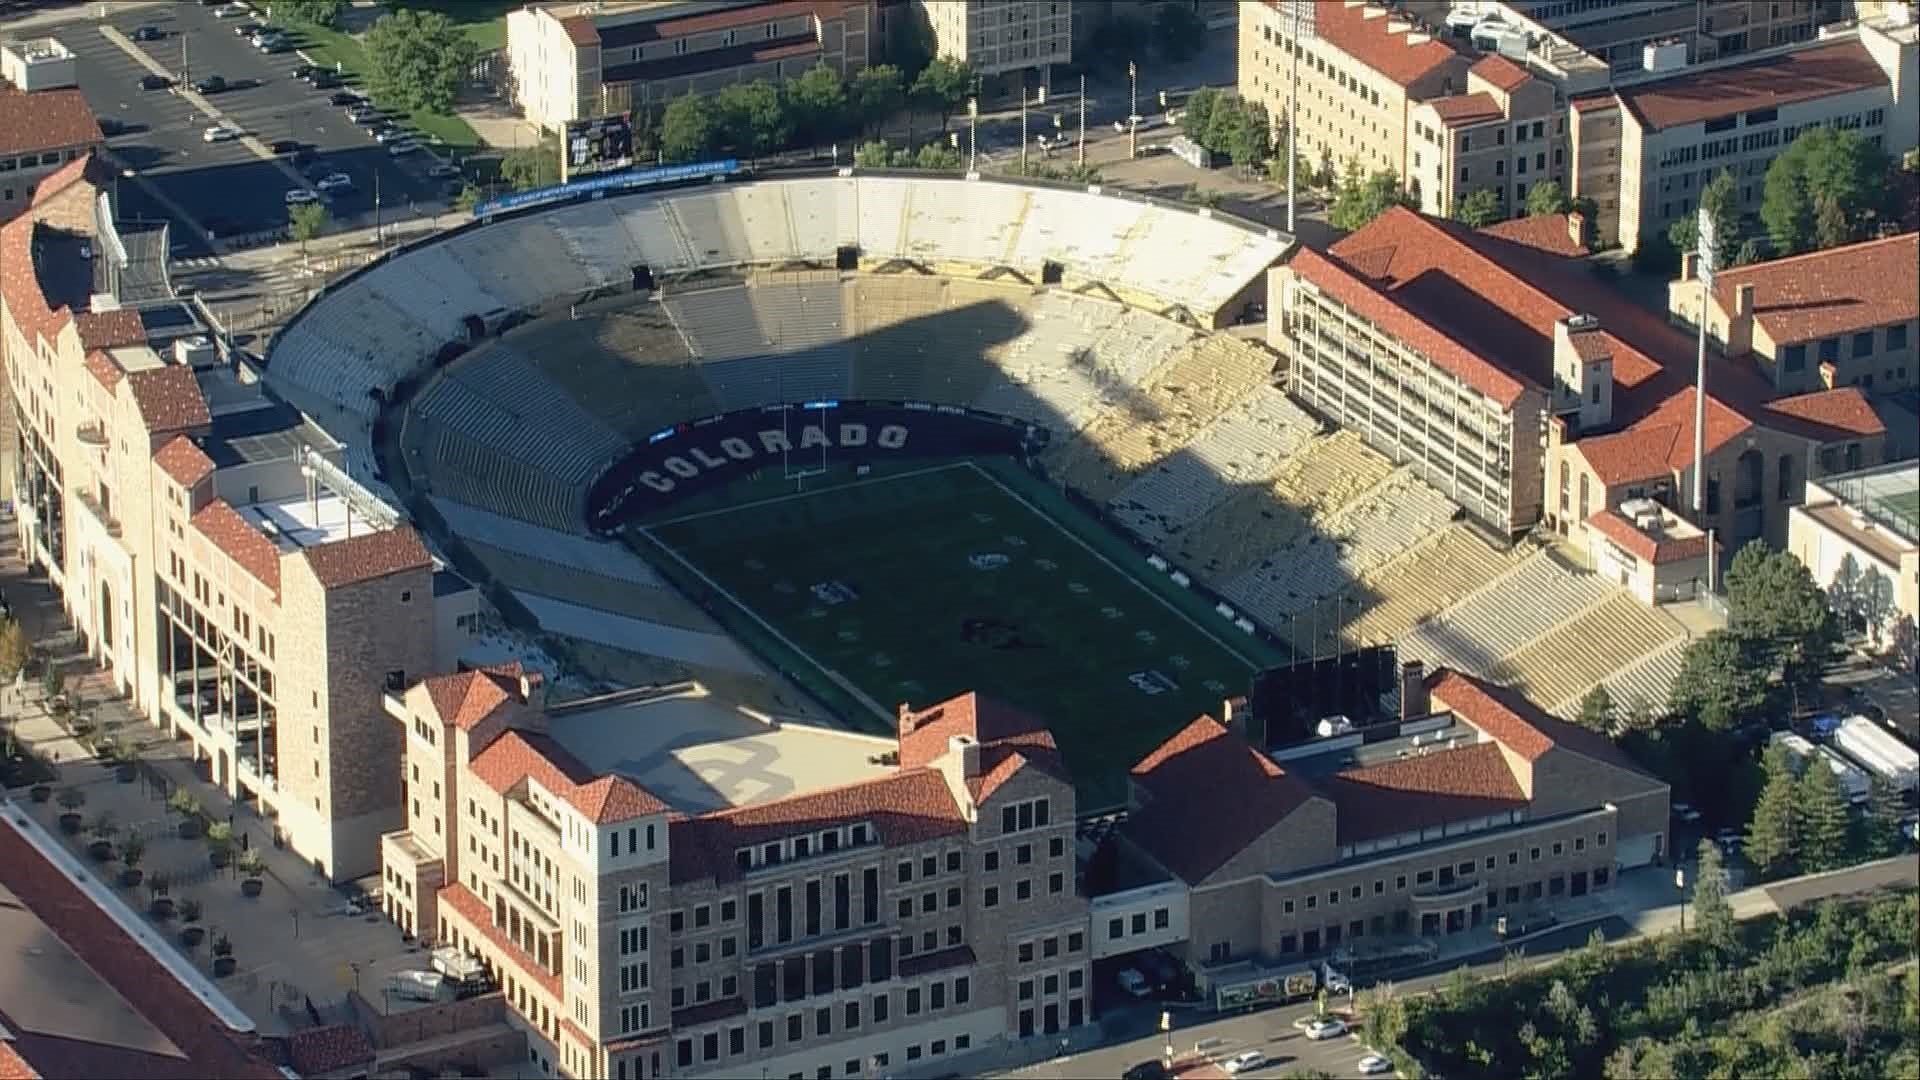 One of the best settings in college football, Folsom Field was built in 271 days in 1924.